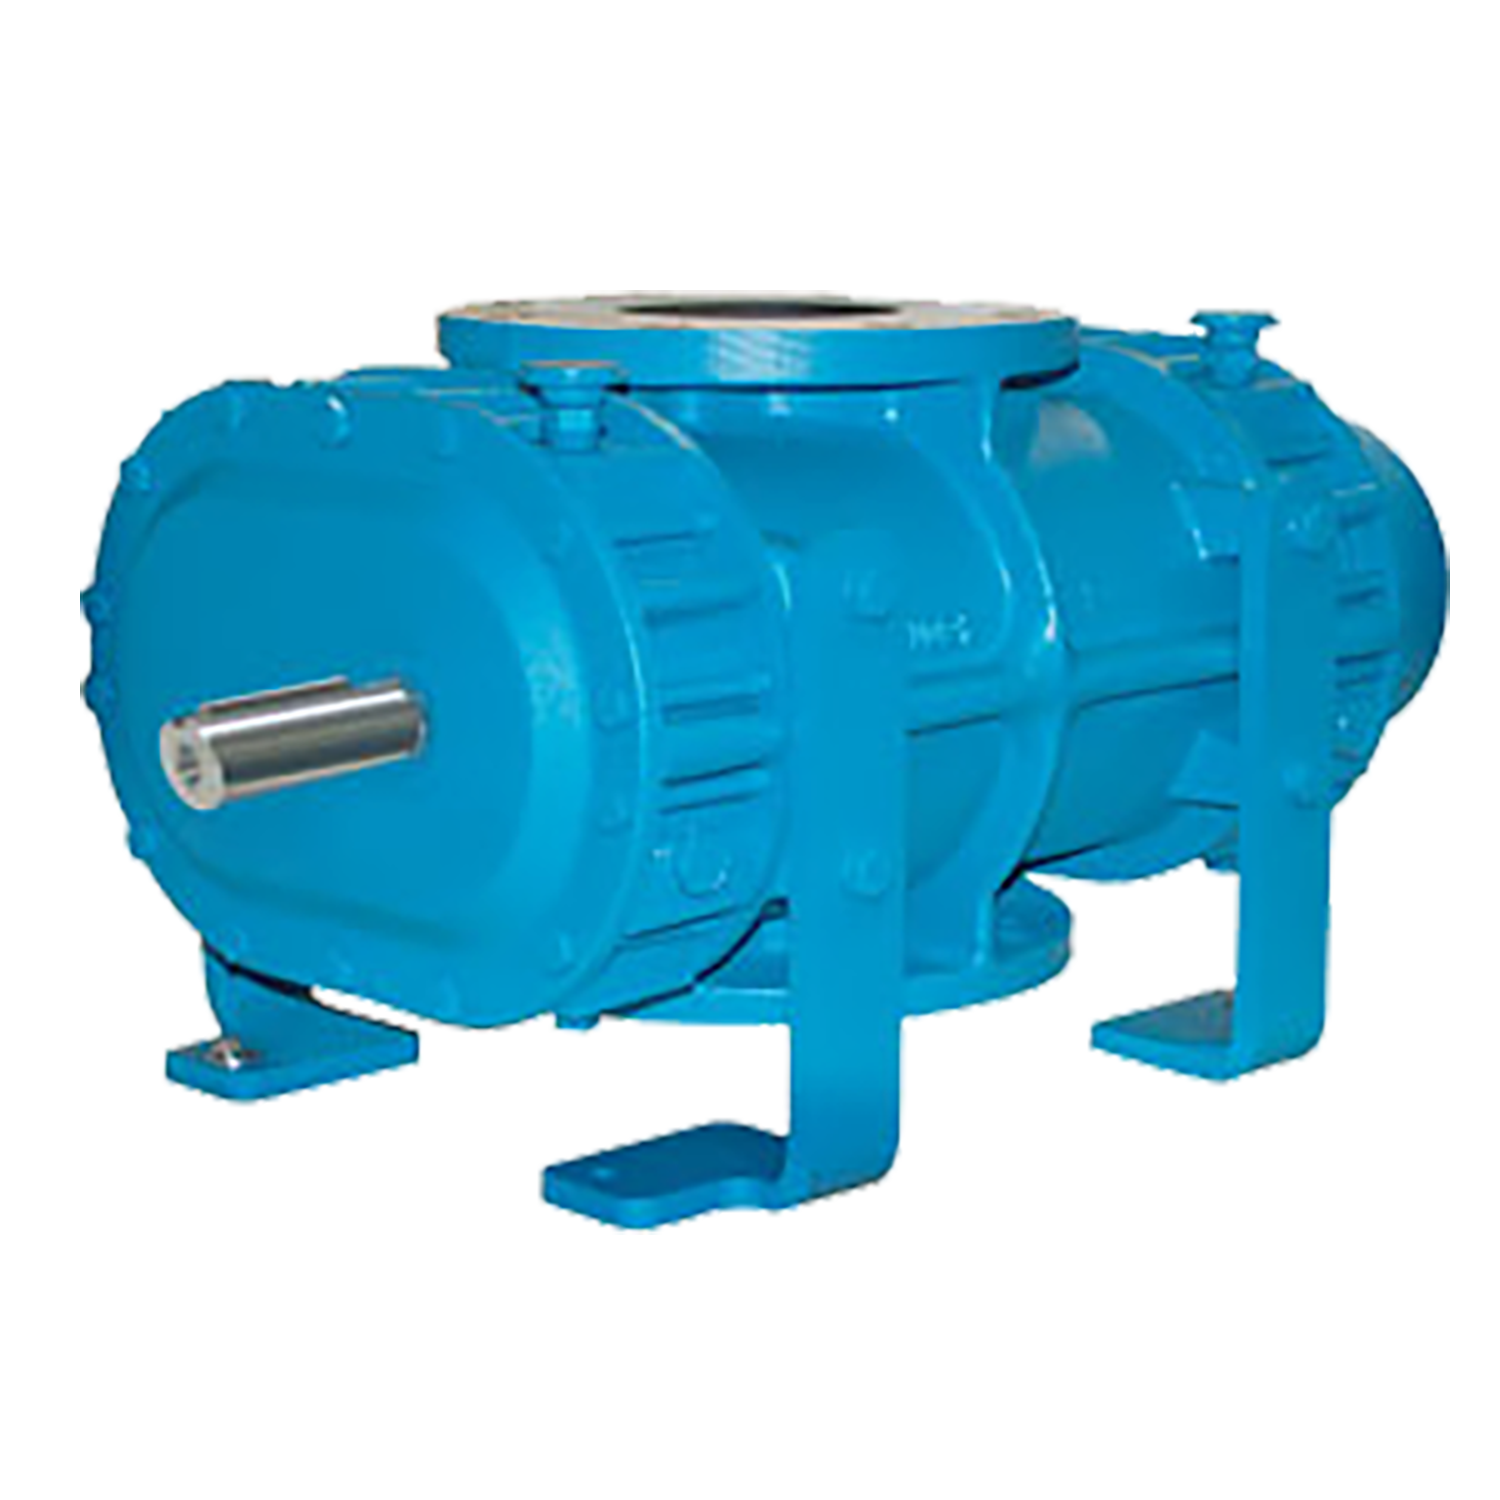 M-D PNEUMATICS-EQUALIZER-BLOWERS-rotary-positive-displacement-blowers